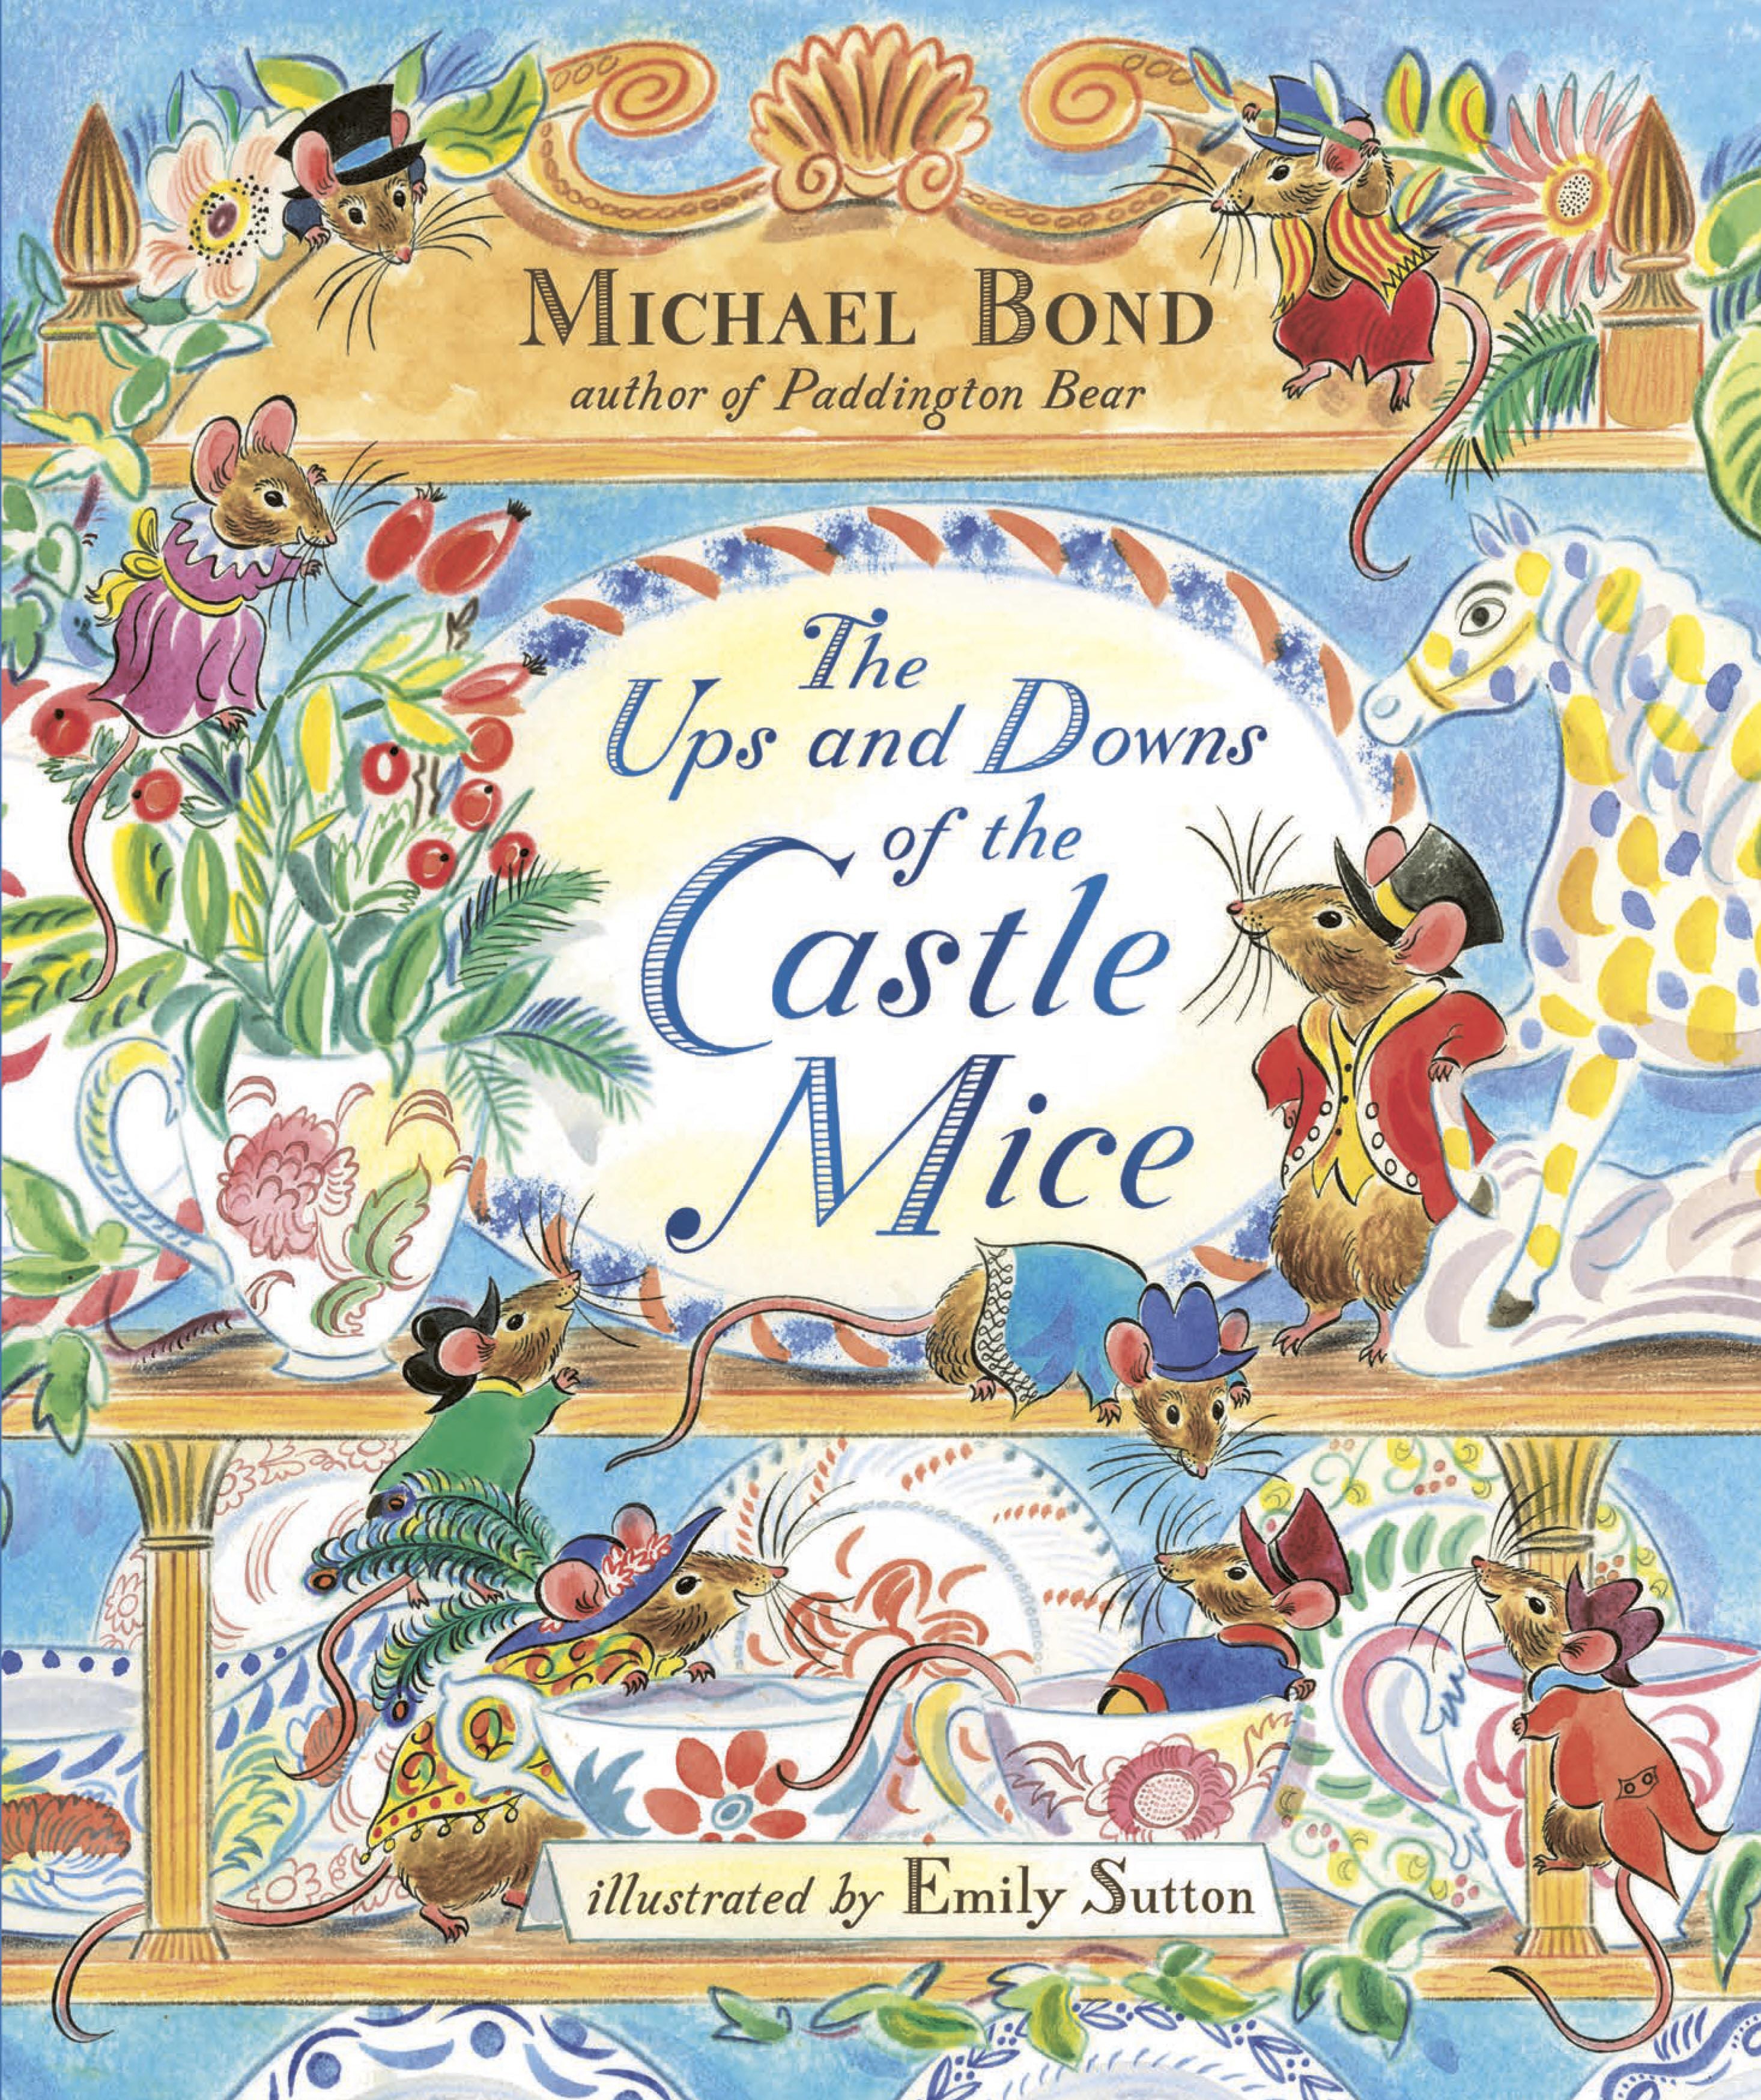 Book “The Ups and Downs of the Castle Mice” by Michael Bond — September 5, 2019